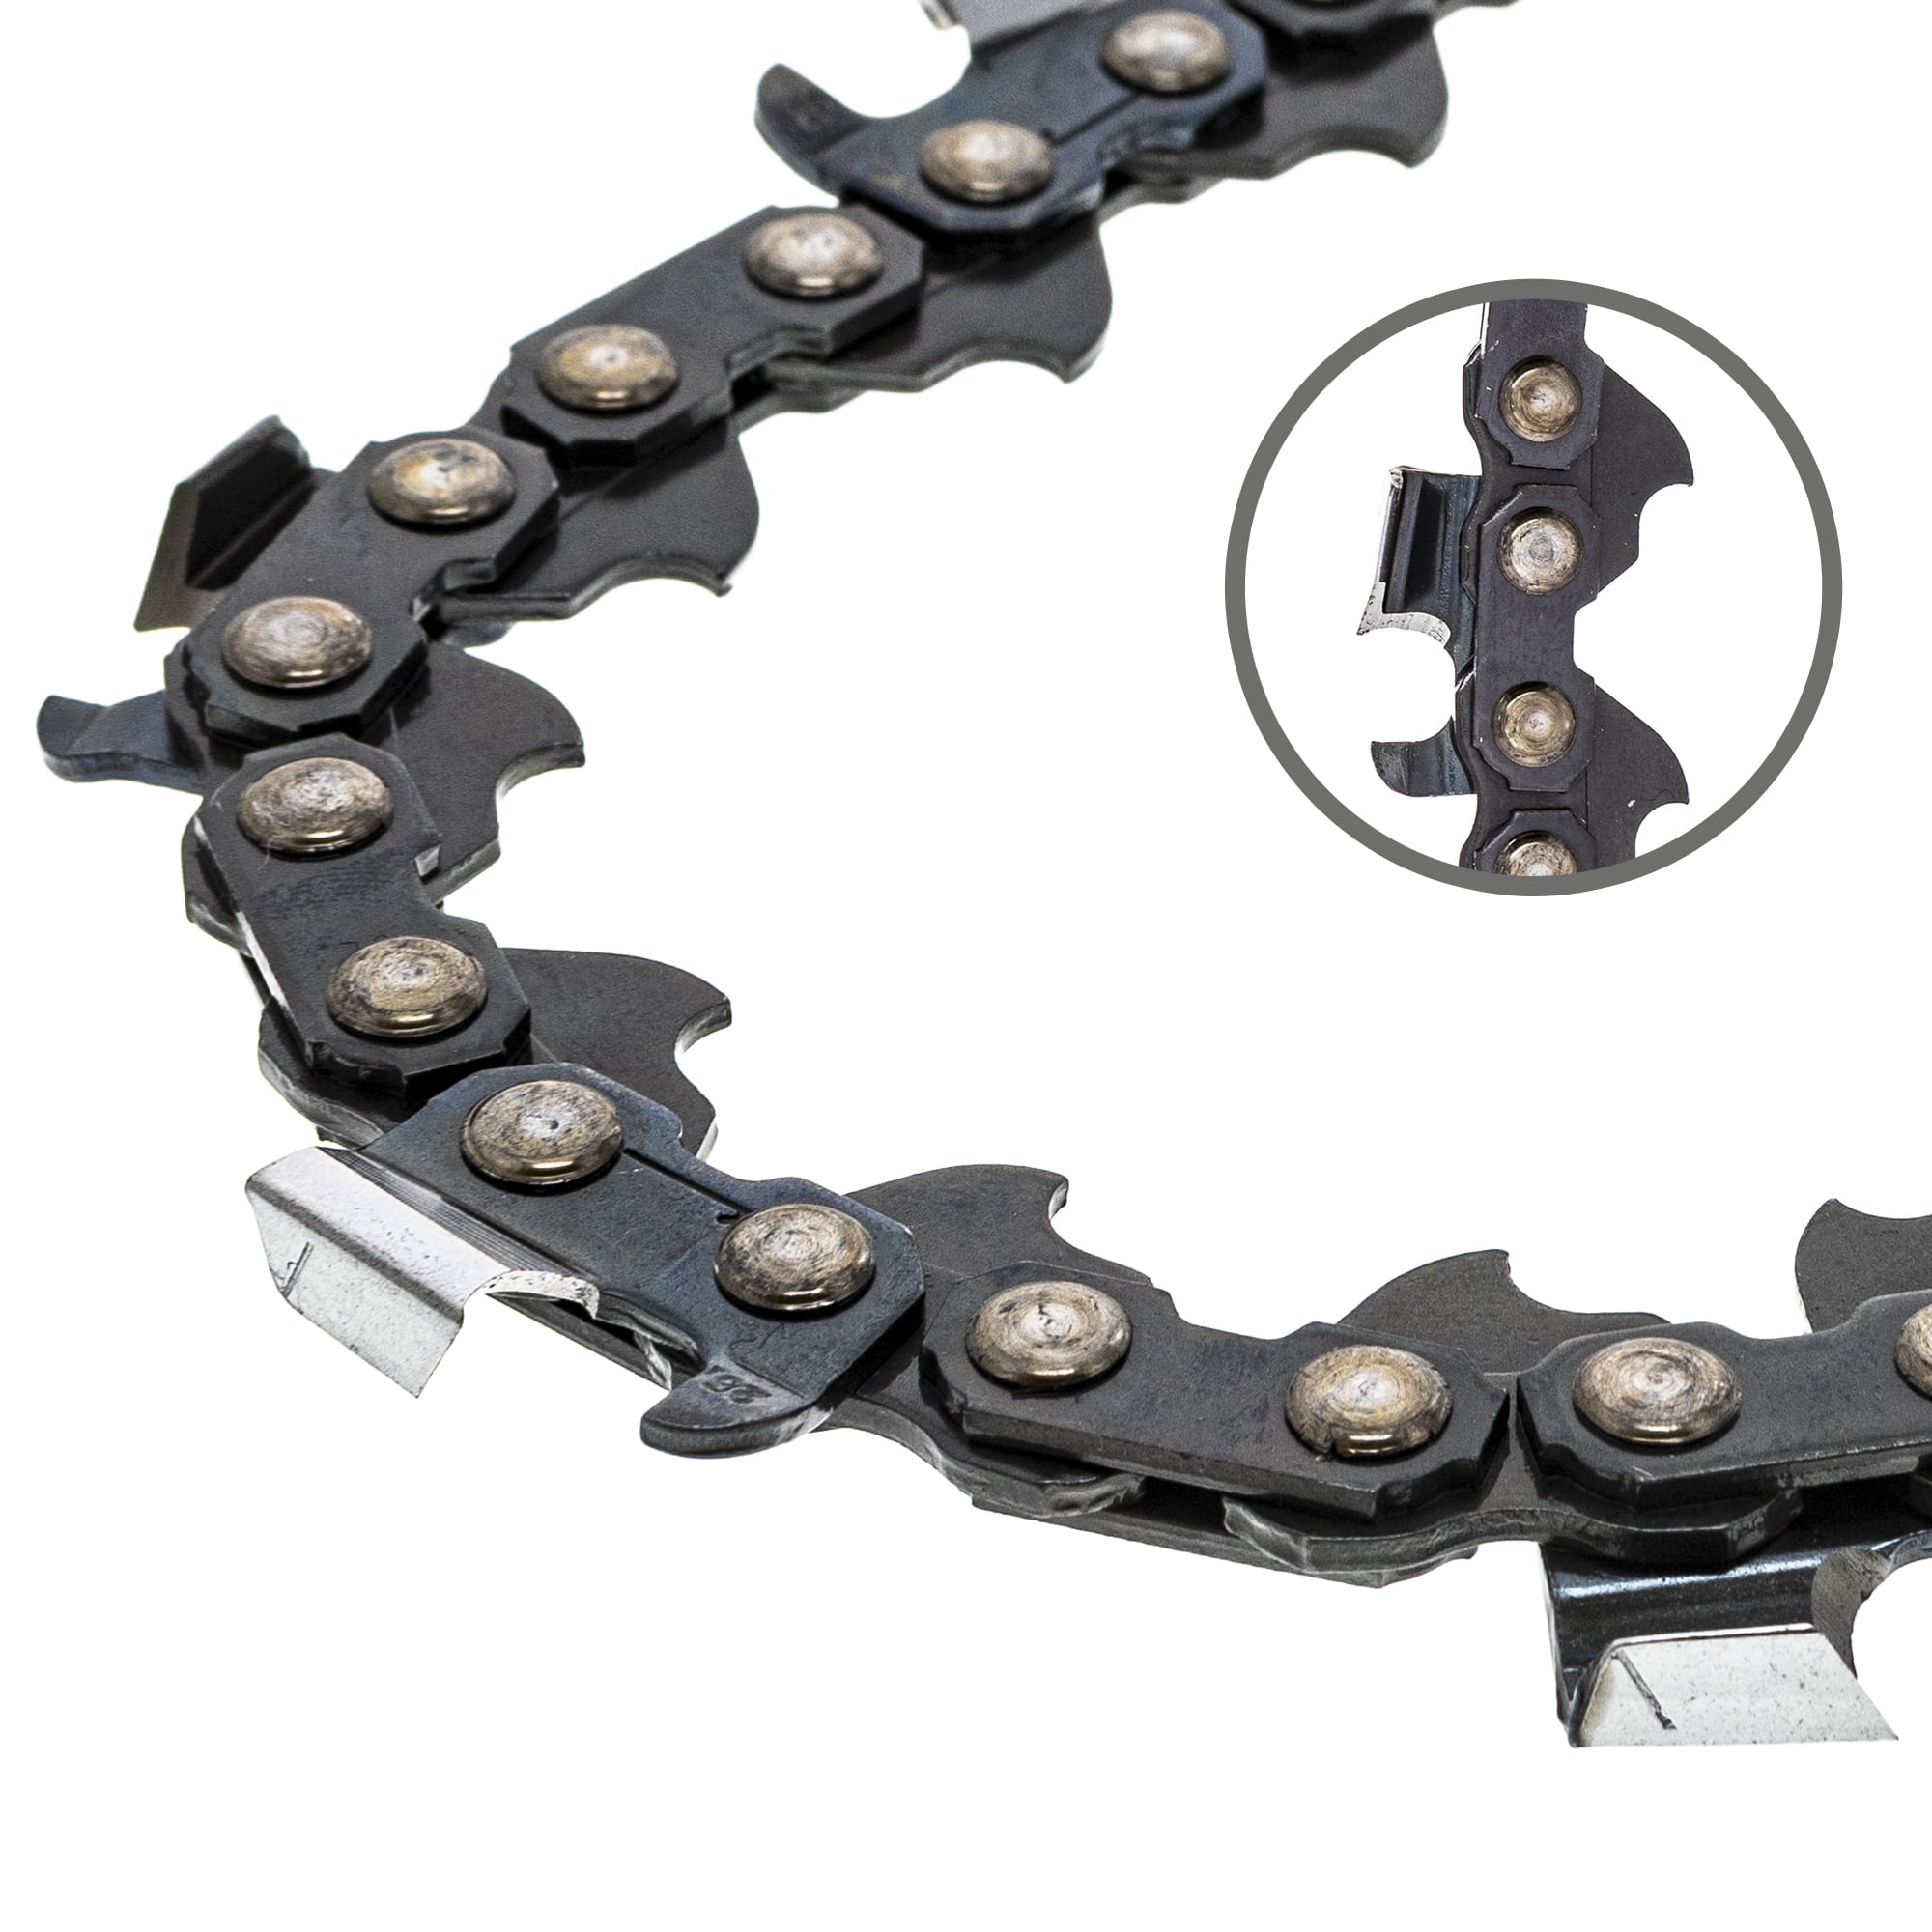 Full Chisel Chainsaw Chain 18 inch .050 3/8 LP 62 DL for Echo 